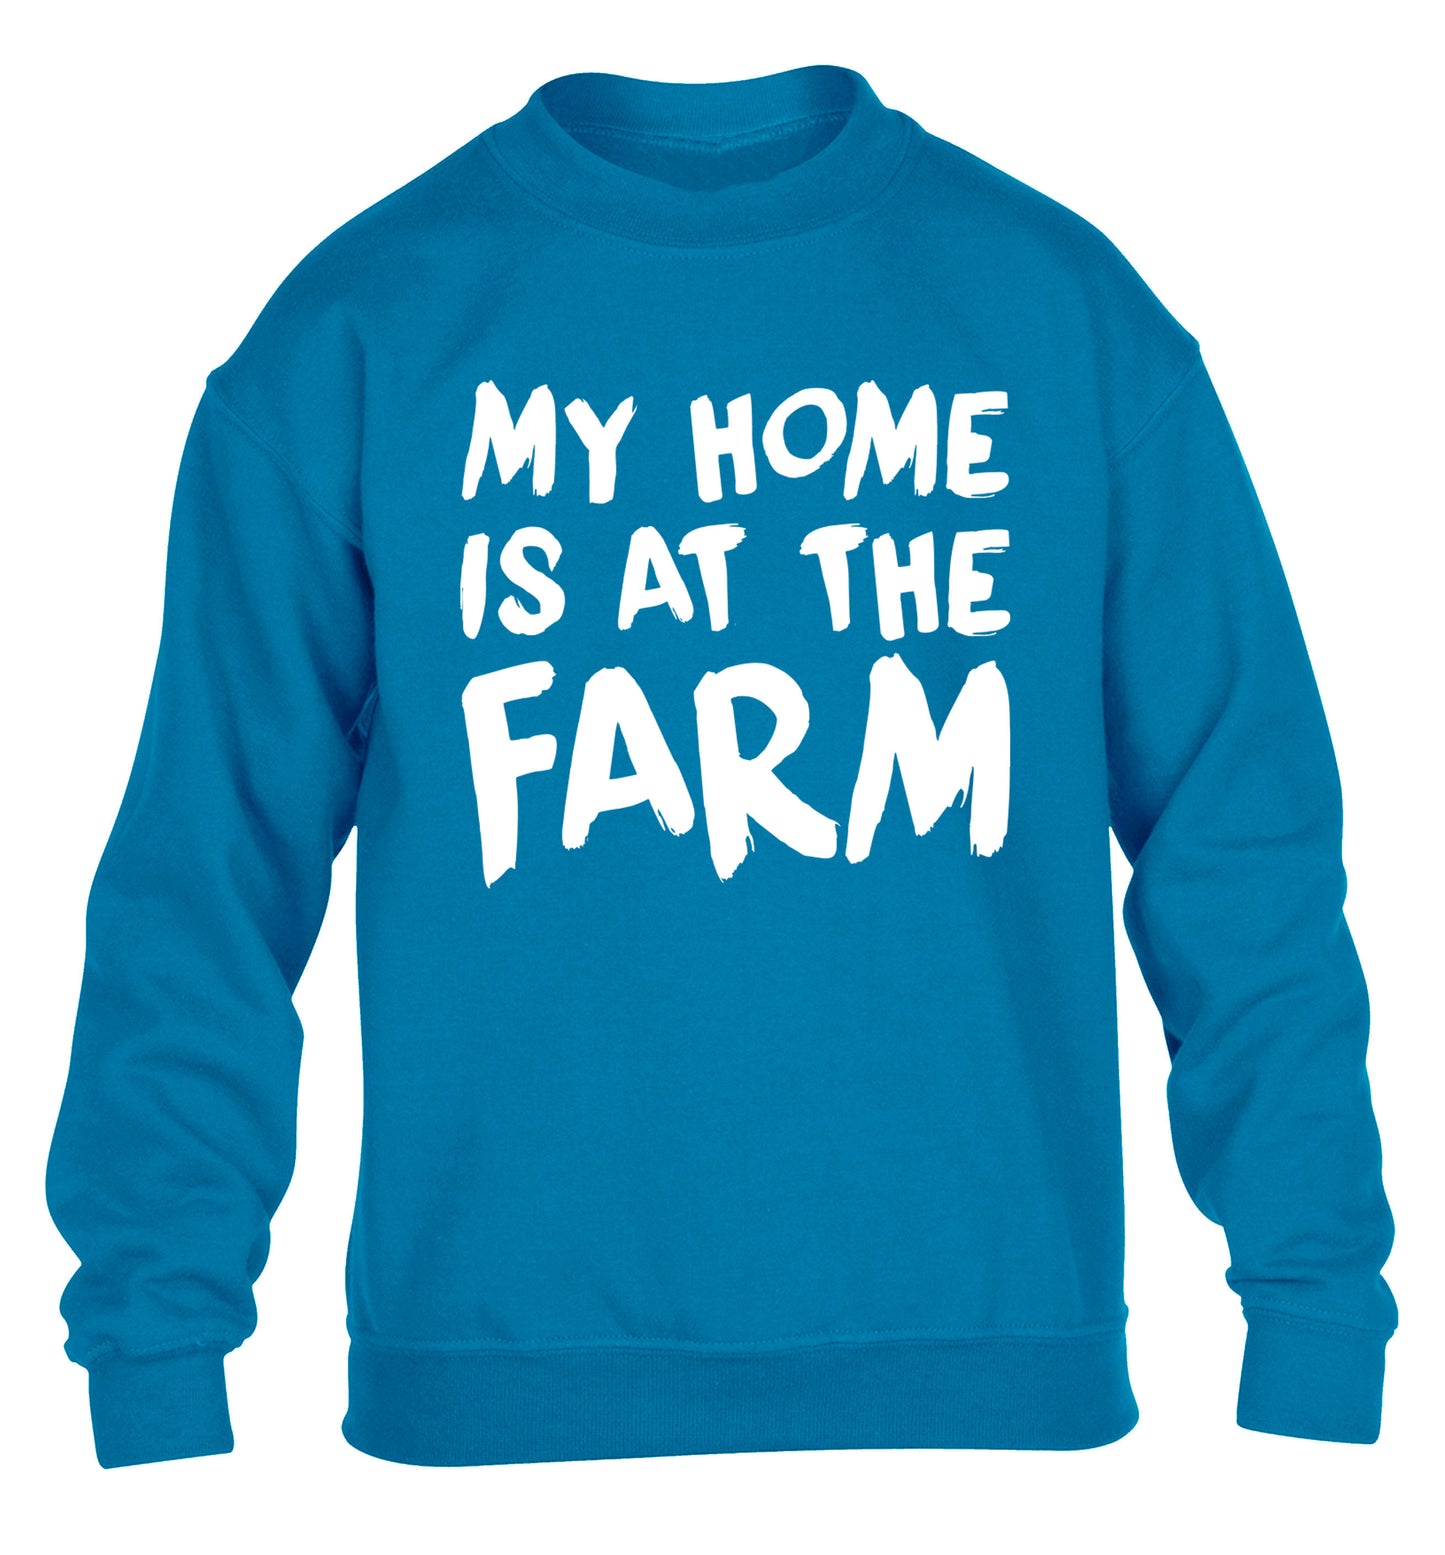 My home is at the farm children's blue sweater 12-14 Years